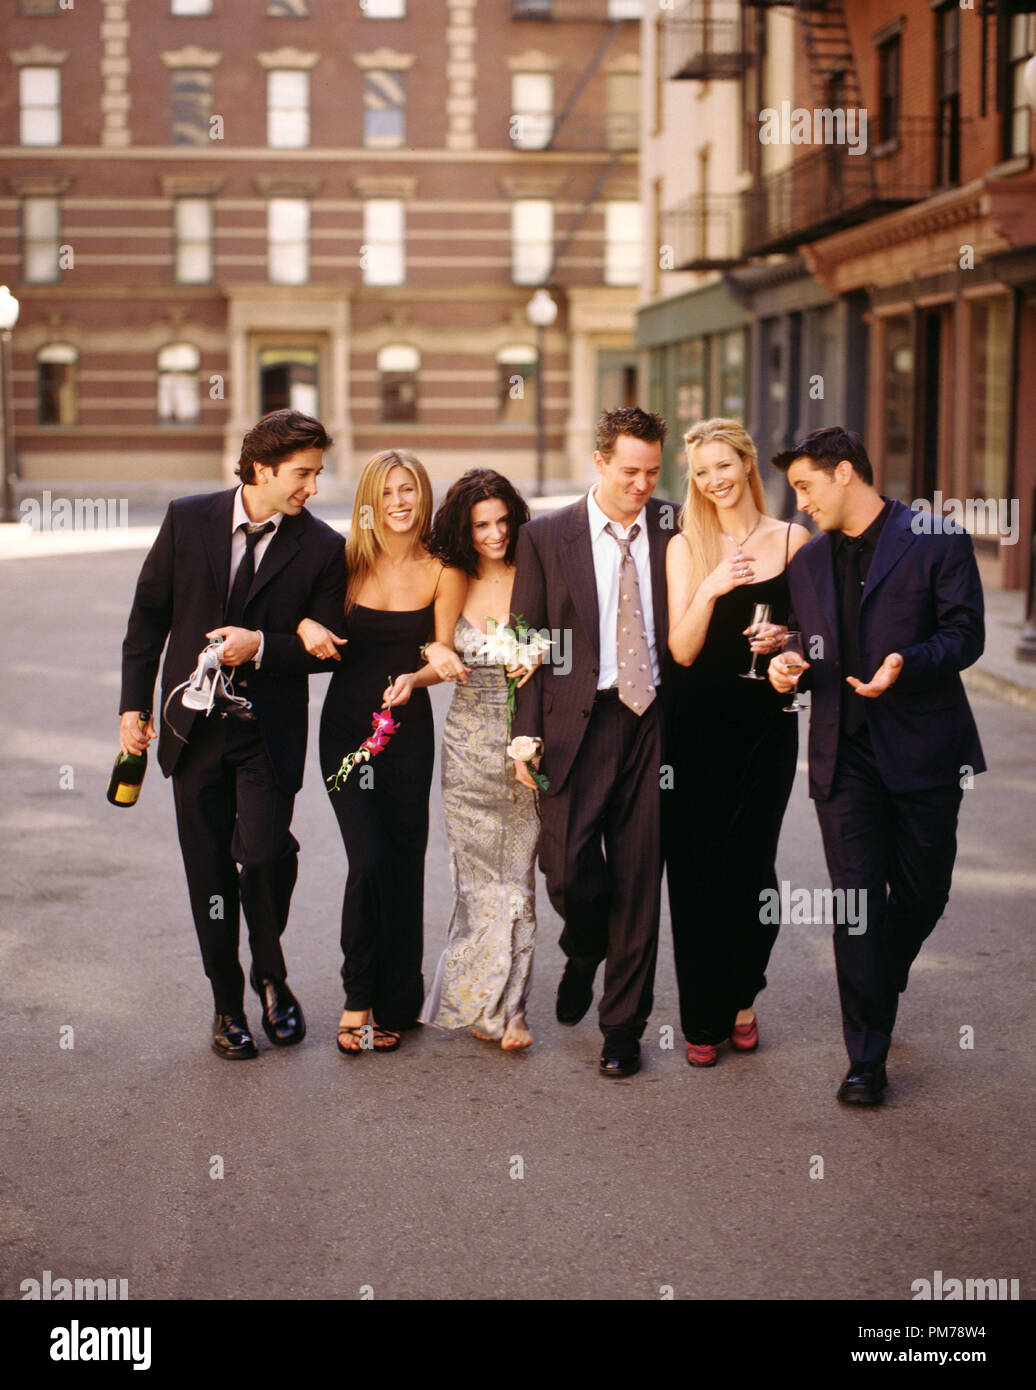 Film Still from 'Friends' David Schwimmer, Jennifer Aniston, Courteney Cox Arquette, Matthew Perry, Lisa Kudrow, Phoebe Buffay, Matt LeBlanc circa 1998    File Reference # 30996527THA  For Editorial Use Only -  All Rights Reserved Stock Photo